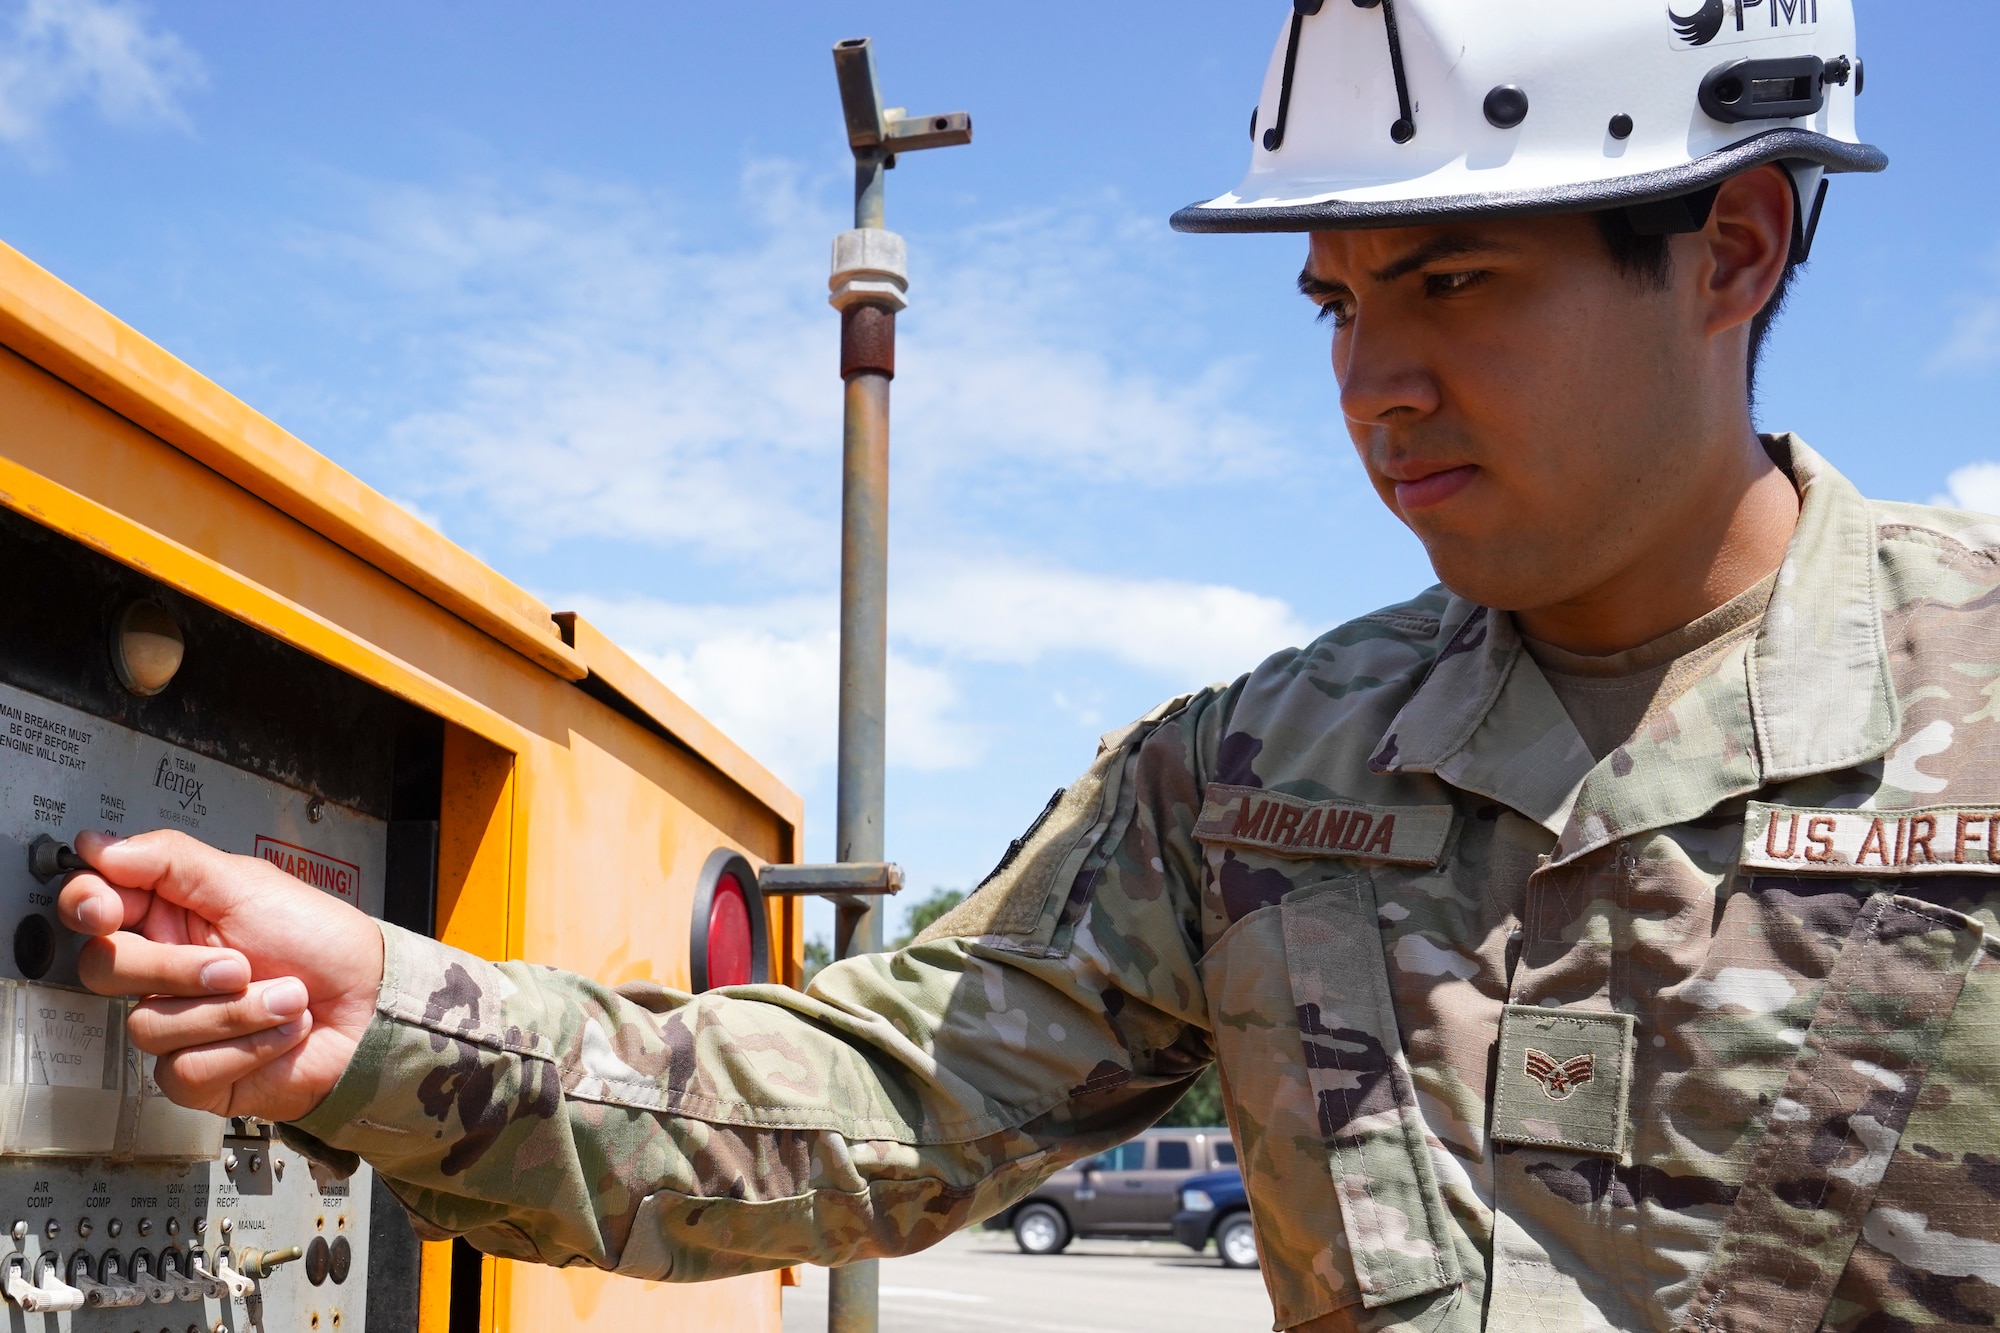 U.S. Air Force Senior Airman David Mirnada, 85th Engineering Installation cable and antenna installer, turns on a generator at Keesler Air Force Base, Mississippi, June 23, 2021. The 85th EIS is the only active duty command, control, communication-computer engineering and installation squadron in the Air Force. (U.S. Air Force photo by Senior Airman Spencer Tobler)